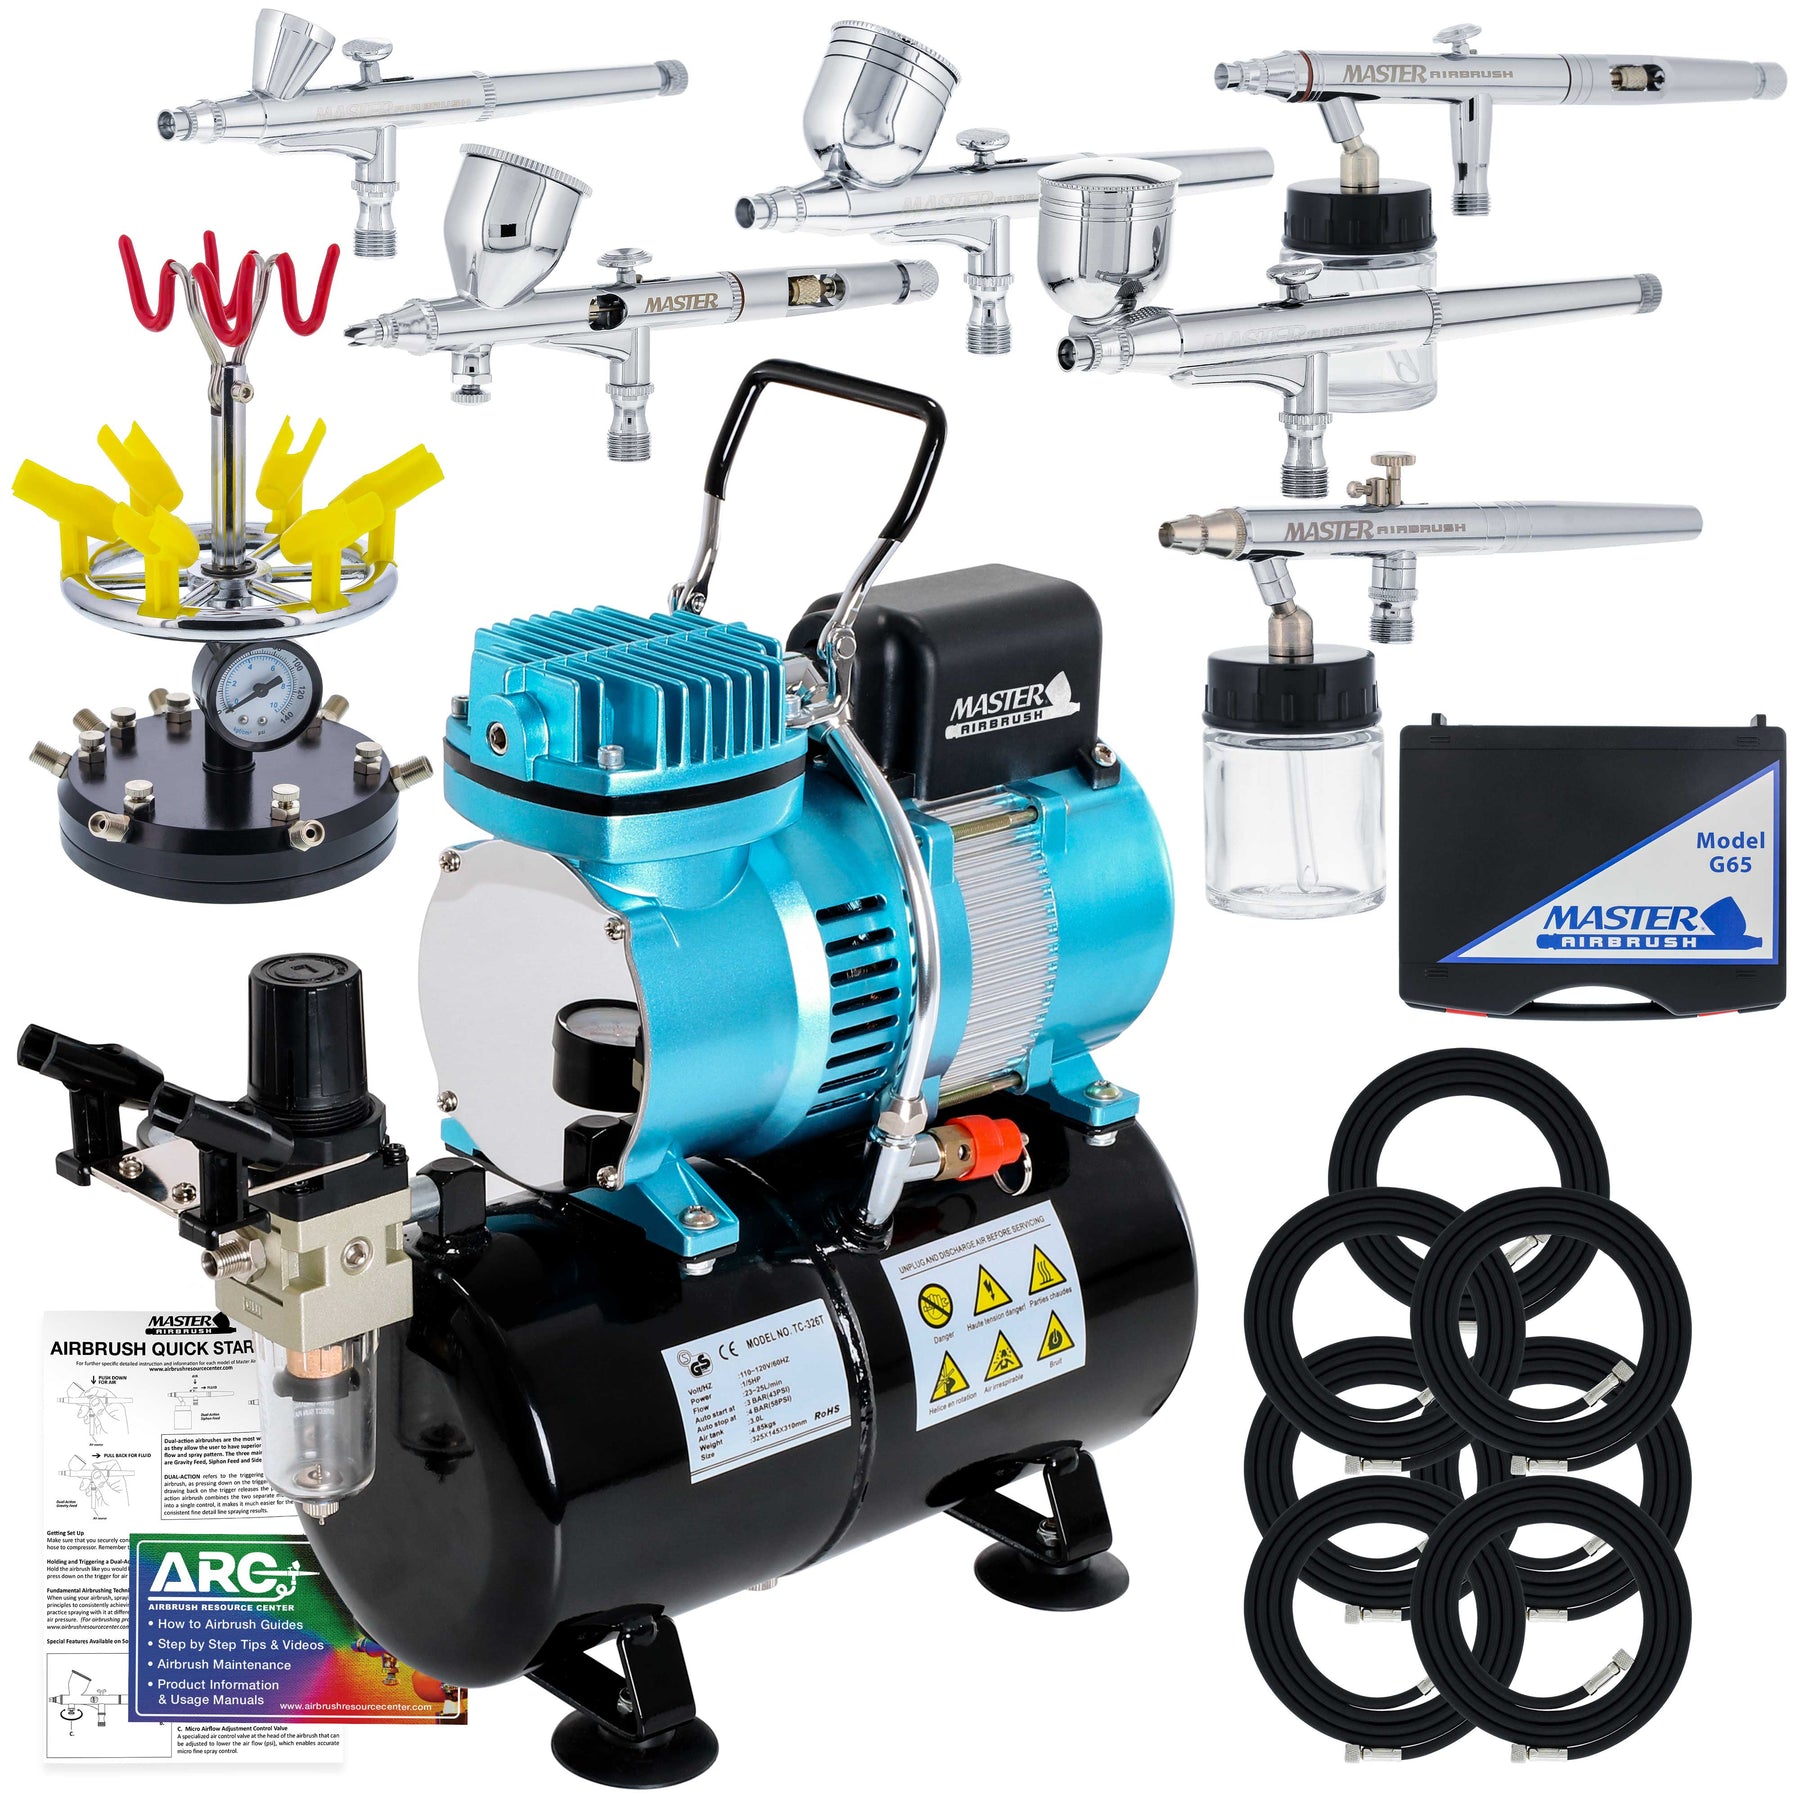 Master Airbrush G65 Studio Set with The TC-20T Air Compressor